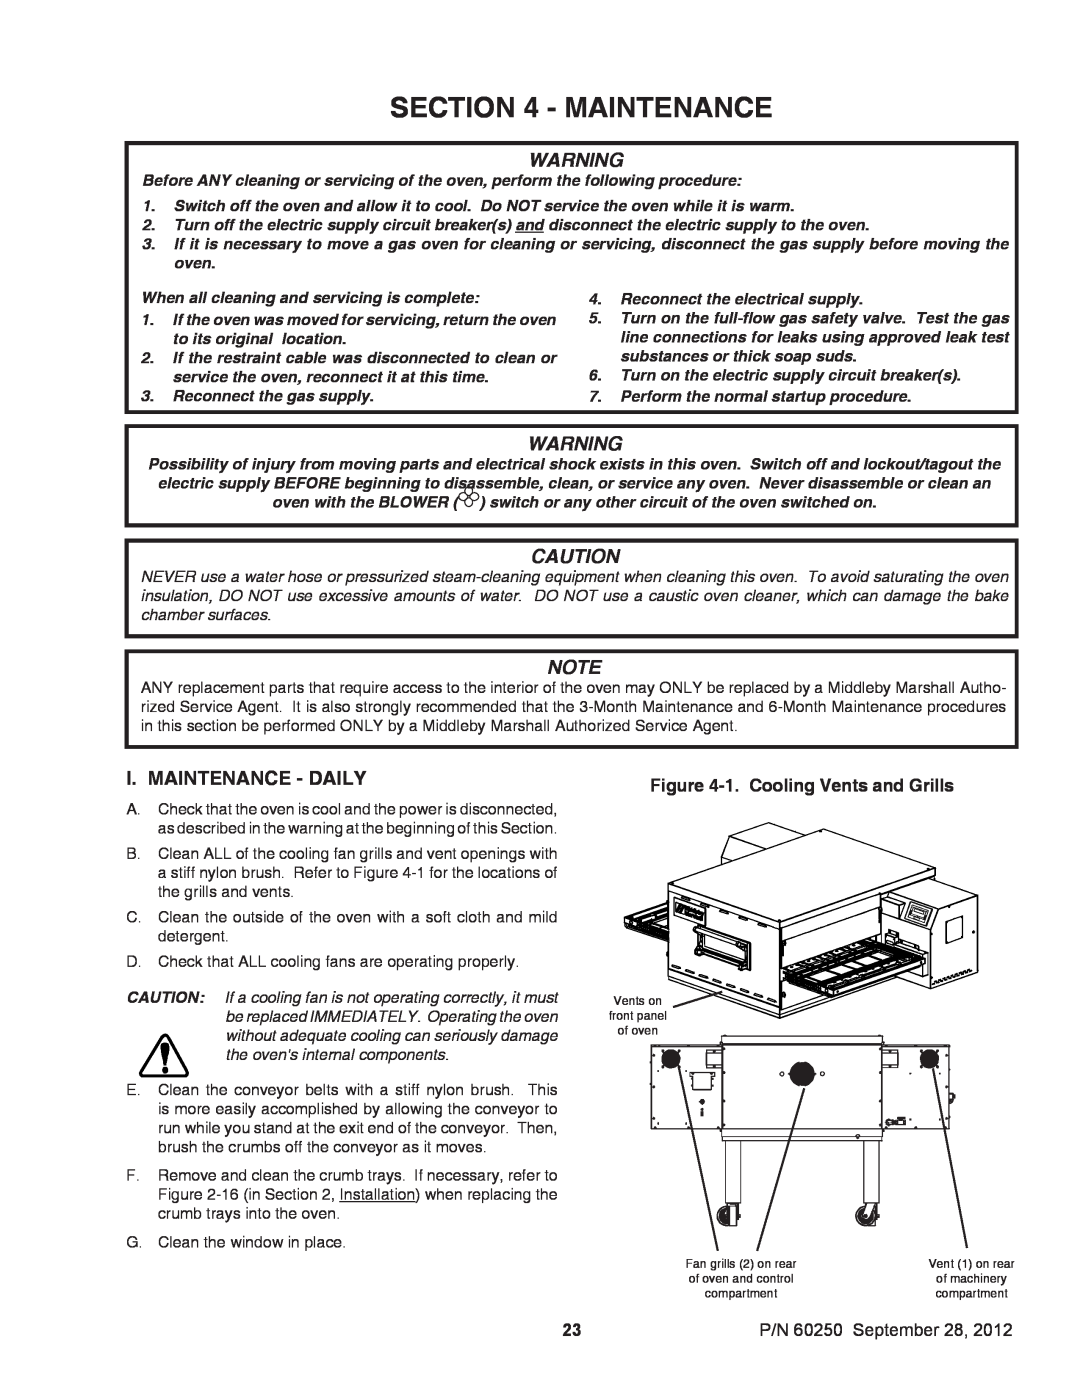 Middleby Marshall installation manual I. Maintenance - Daily, 1. Cooling Vents and Grills, P/N 60250 September 